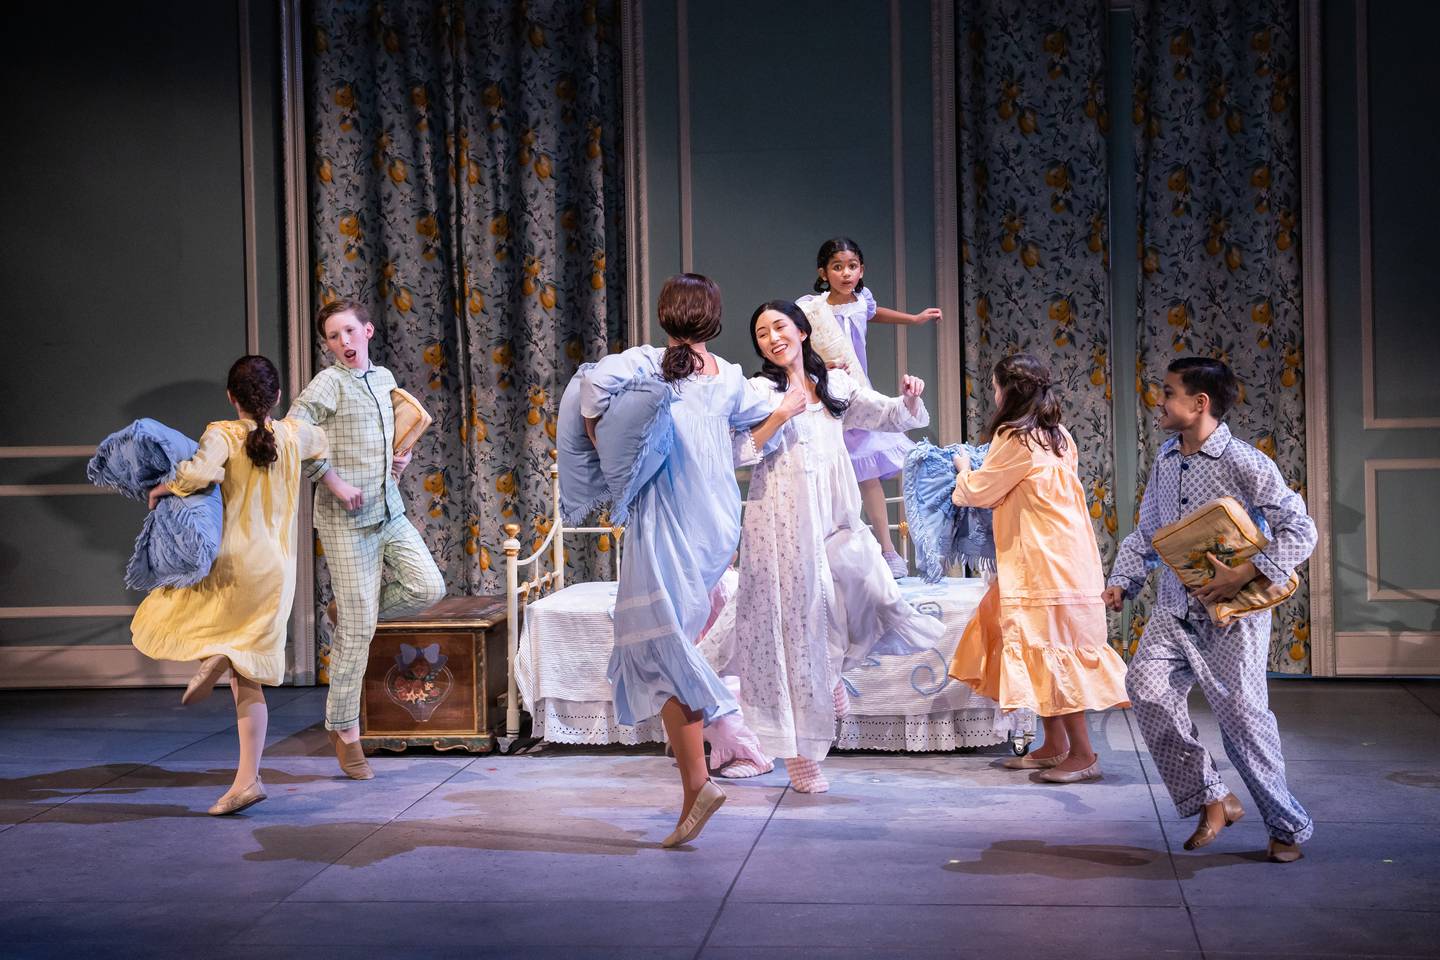 (from left) Milla Liss as Brigitta, Gage Richey as Friedrich, Julia Aragon as Liesl, Alicia Kaori as Maria, Savannah Lumar as Marta, Maddie Morgan as Louisa and Ezekiel Ruiz as Kurt in Paramount Theatre’s holiday season production, The Sound of Music. Rodgers and Hammerstein’s beloved musical runs November 9, 2022-January 14, 2023 at Paramount Theatre, 23 E. Galena Blvd. in downtown Aurora. Tickets: paramountaurora.com or (630) 896-6666. Credit: Liz Lauren. Note: this children’s cast rotates performances with a second children’s company, plus a third set of understudies, in Paramount’s The Sound of Music.